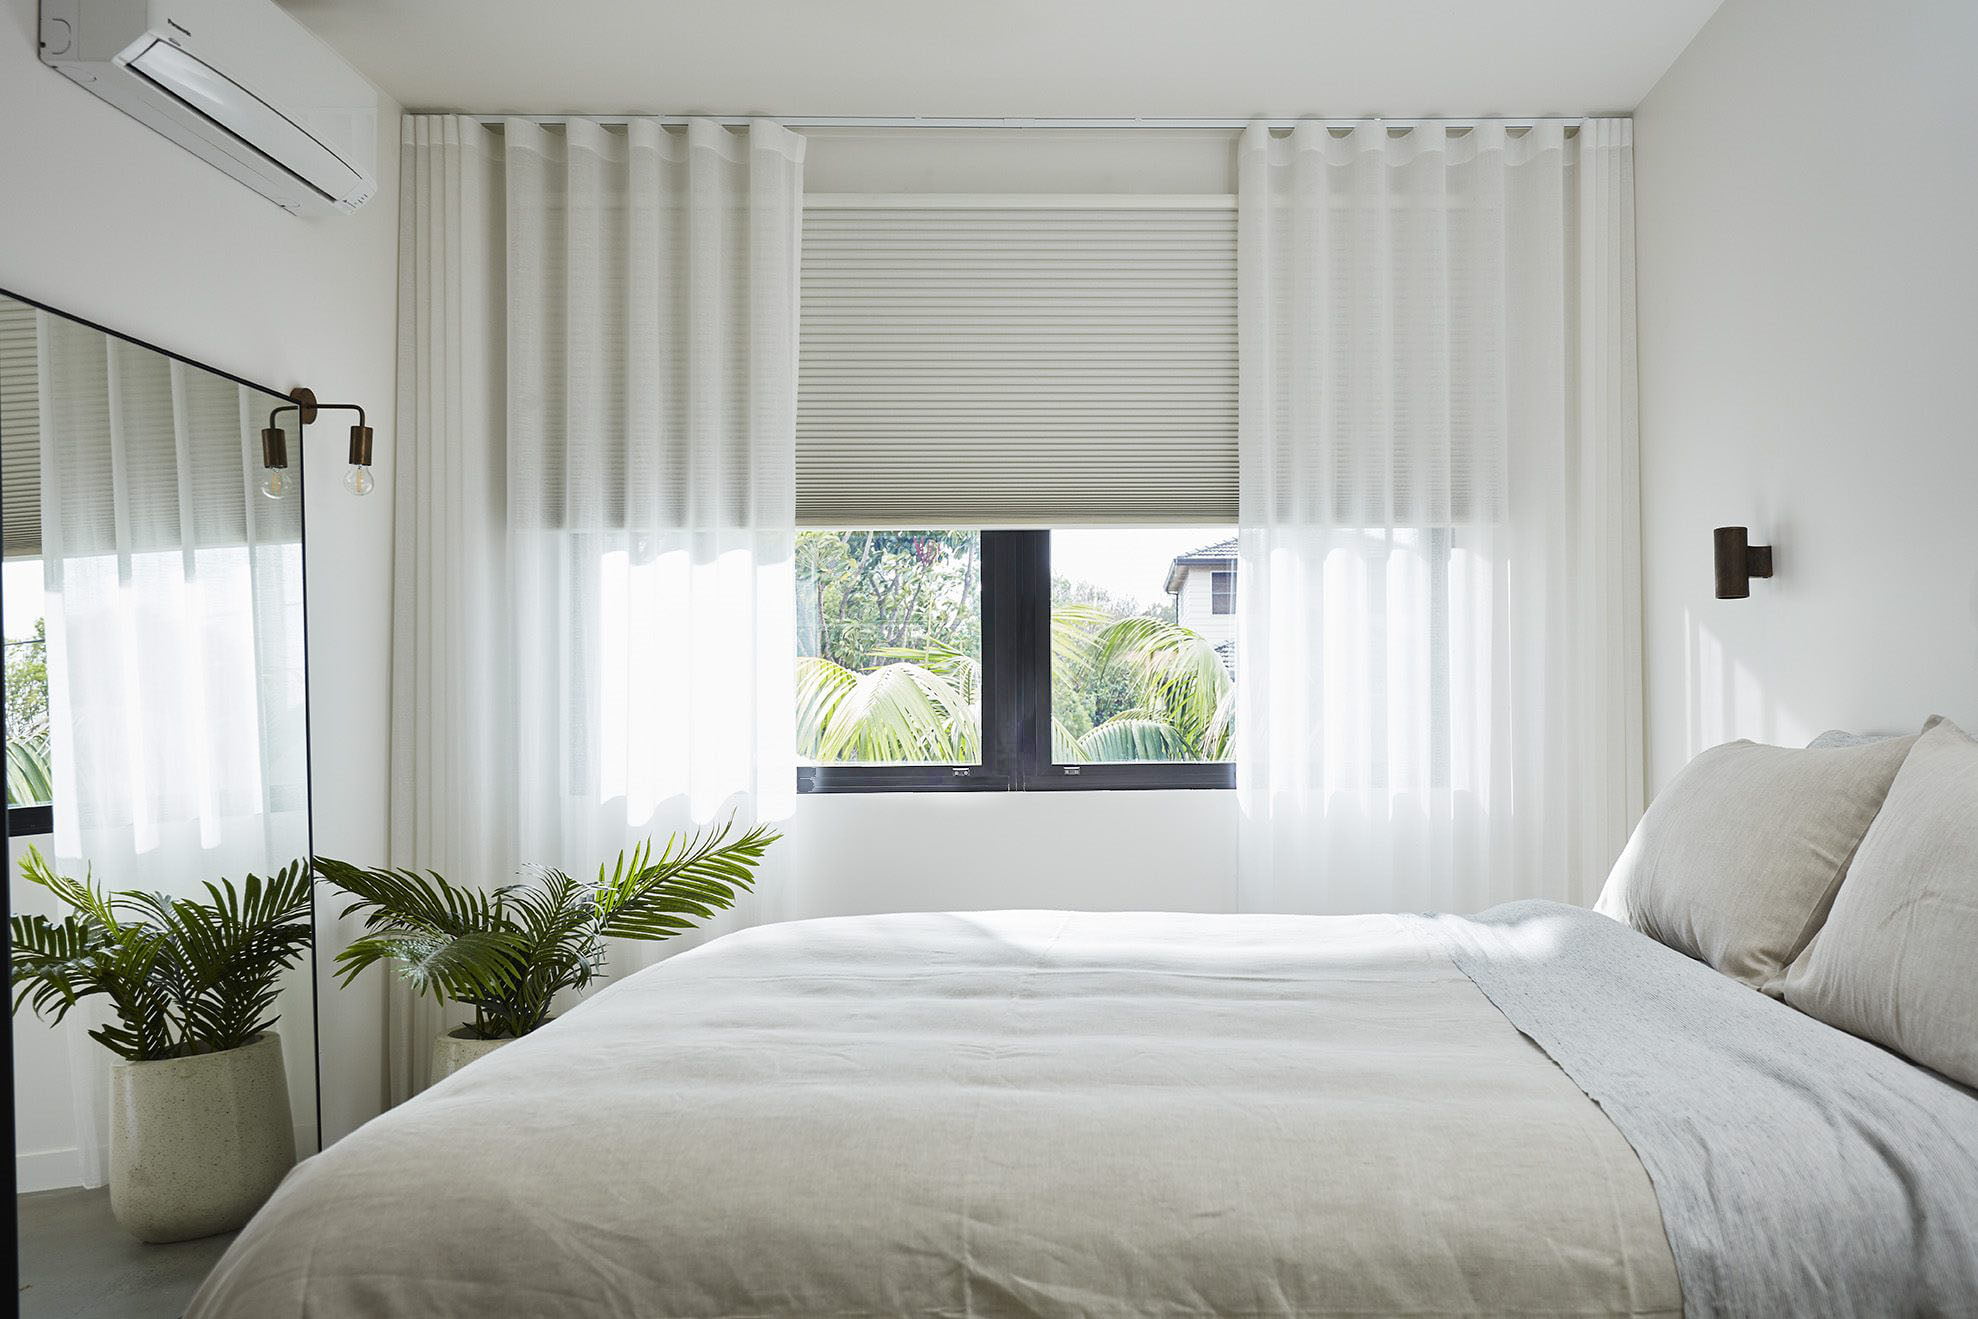 How to choose the right window coverings for your bedrooms